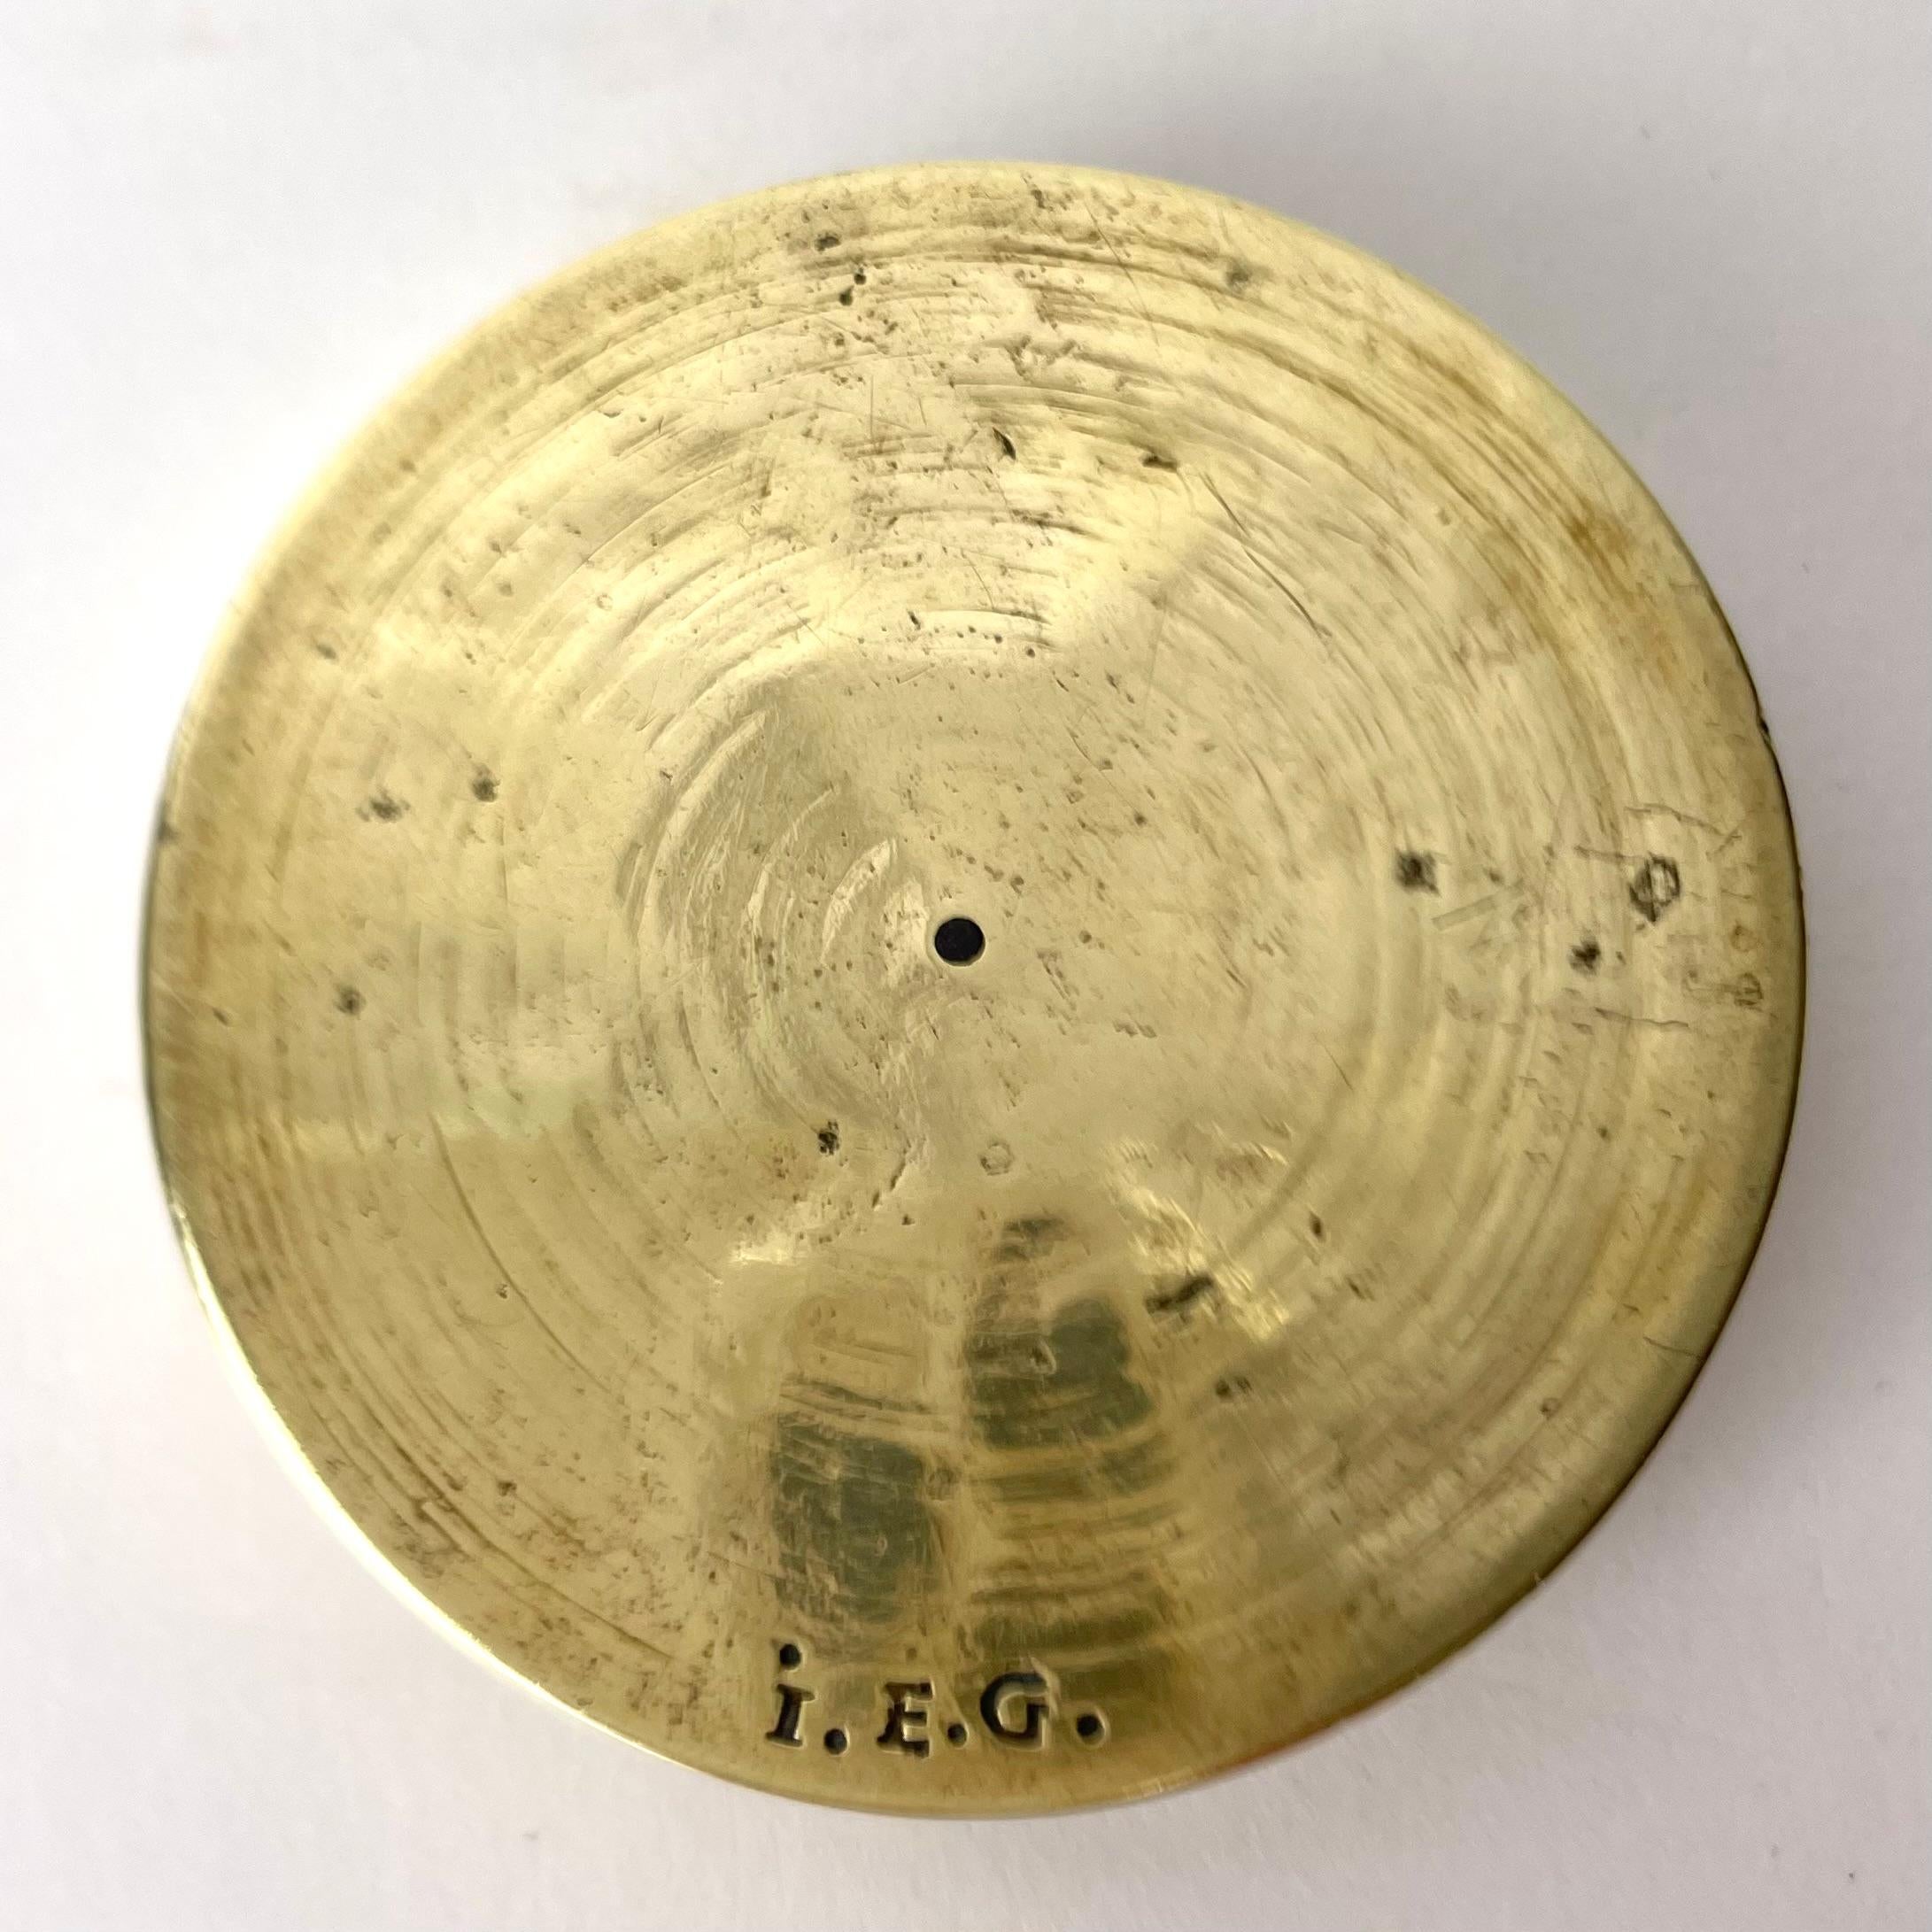 Engraved Gustavian Compass with Sundial in Brass, Late 18th/Early 19th Century Sweden